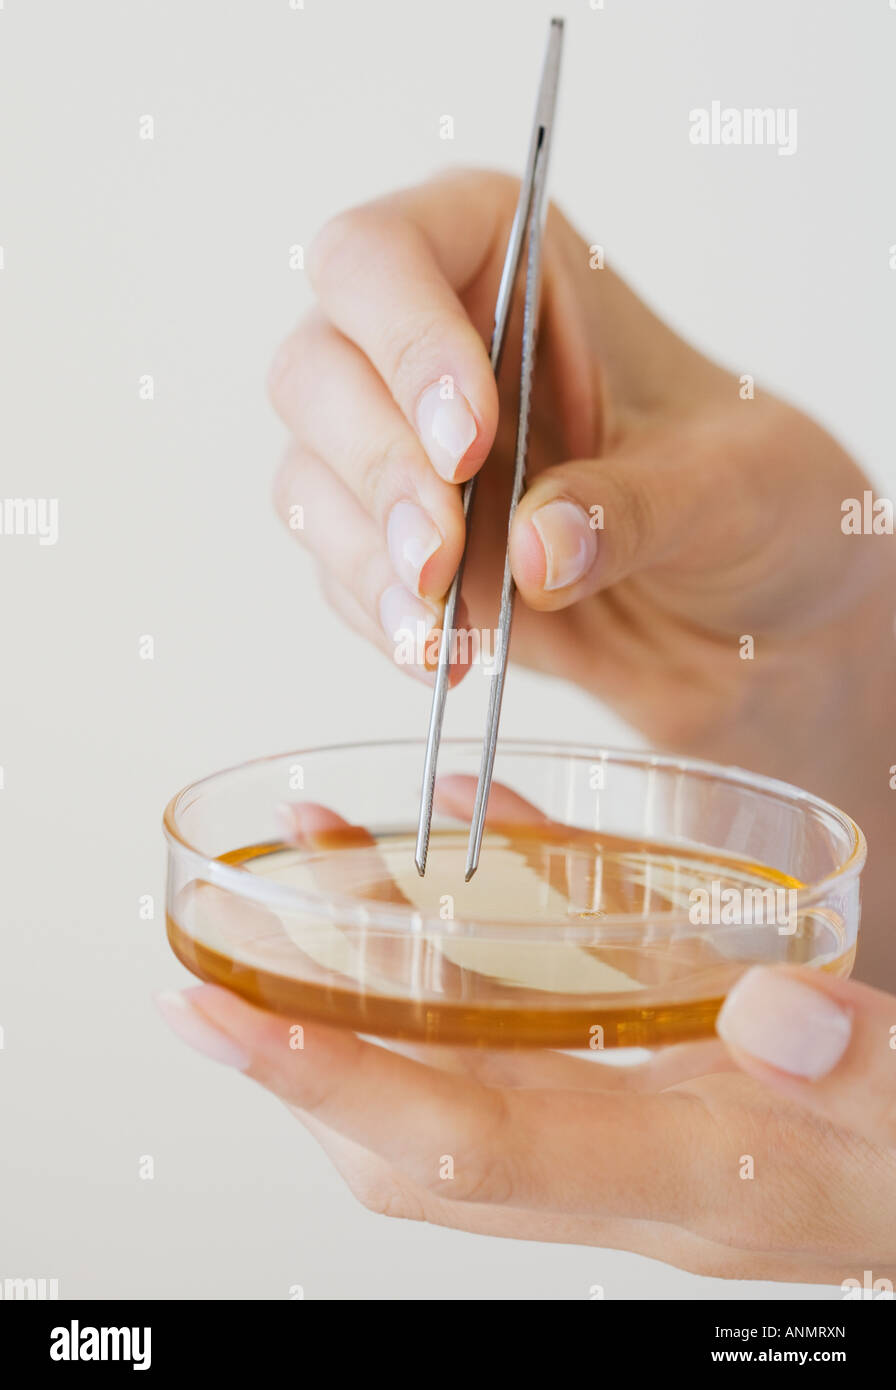 Woman removing strip from petri dish with tweezers Stock Photo